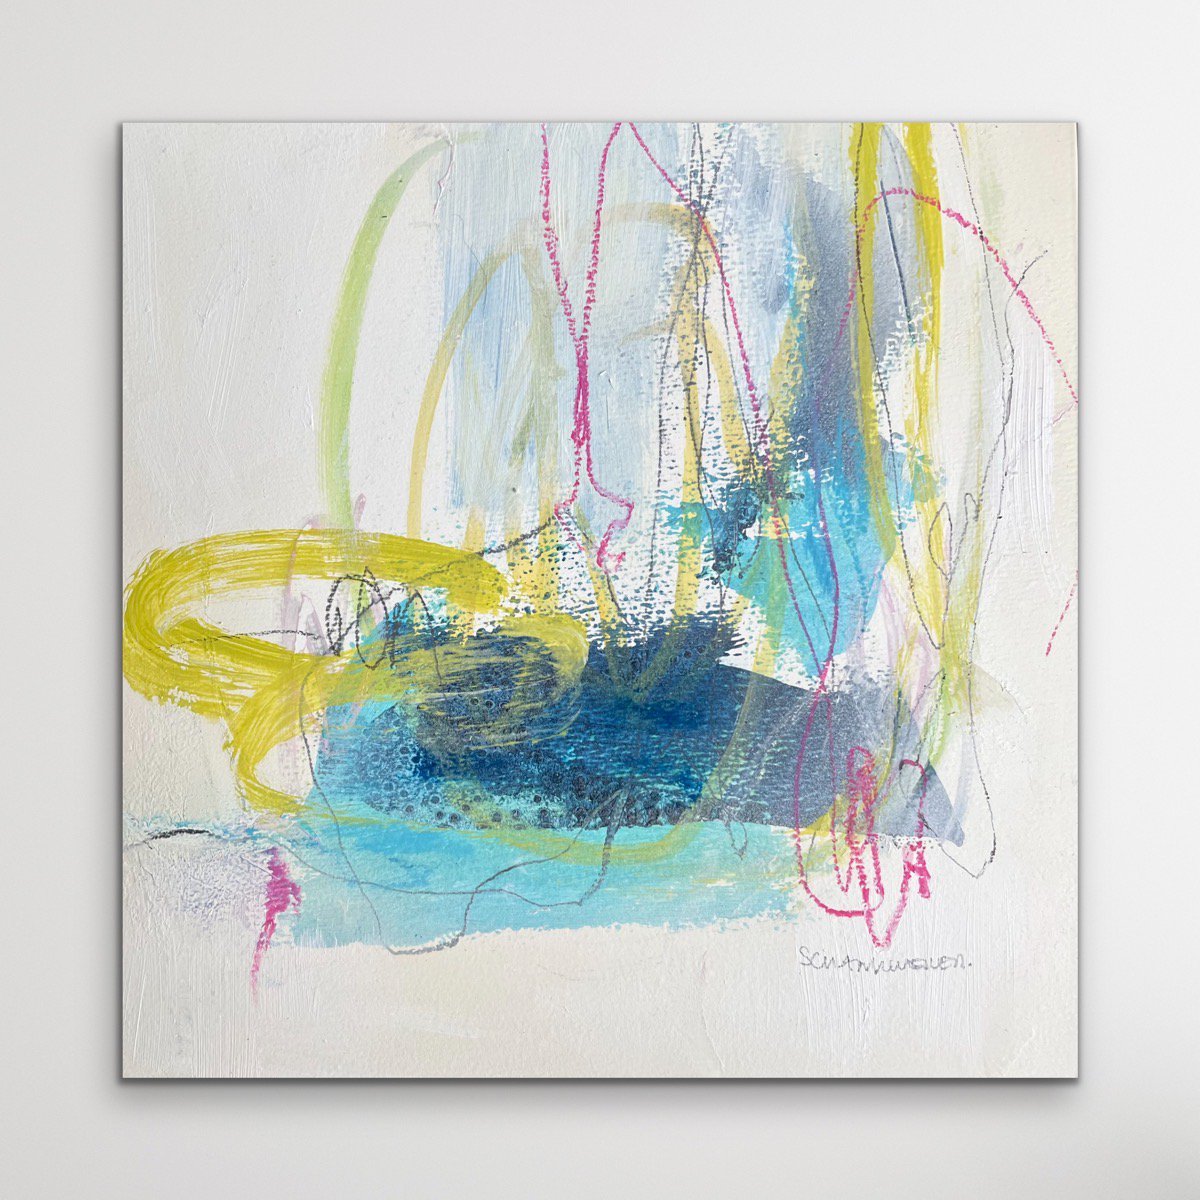 After the rain #6 I 20 x 20 cm I abstract artwork on wood by Kirsten Schankweiler